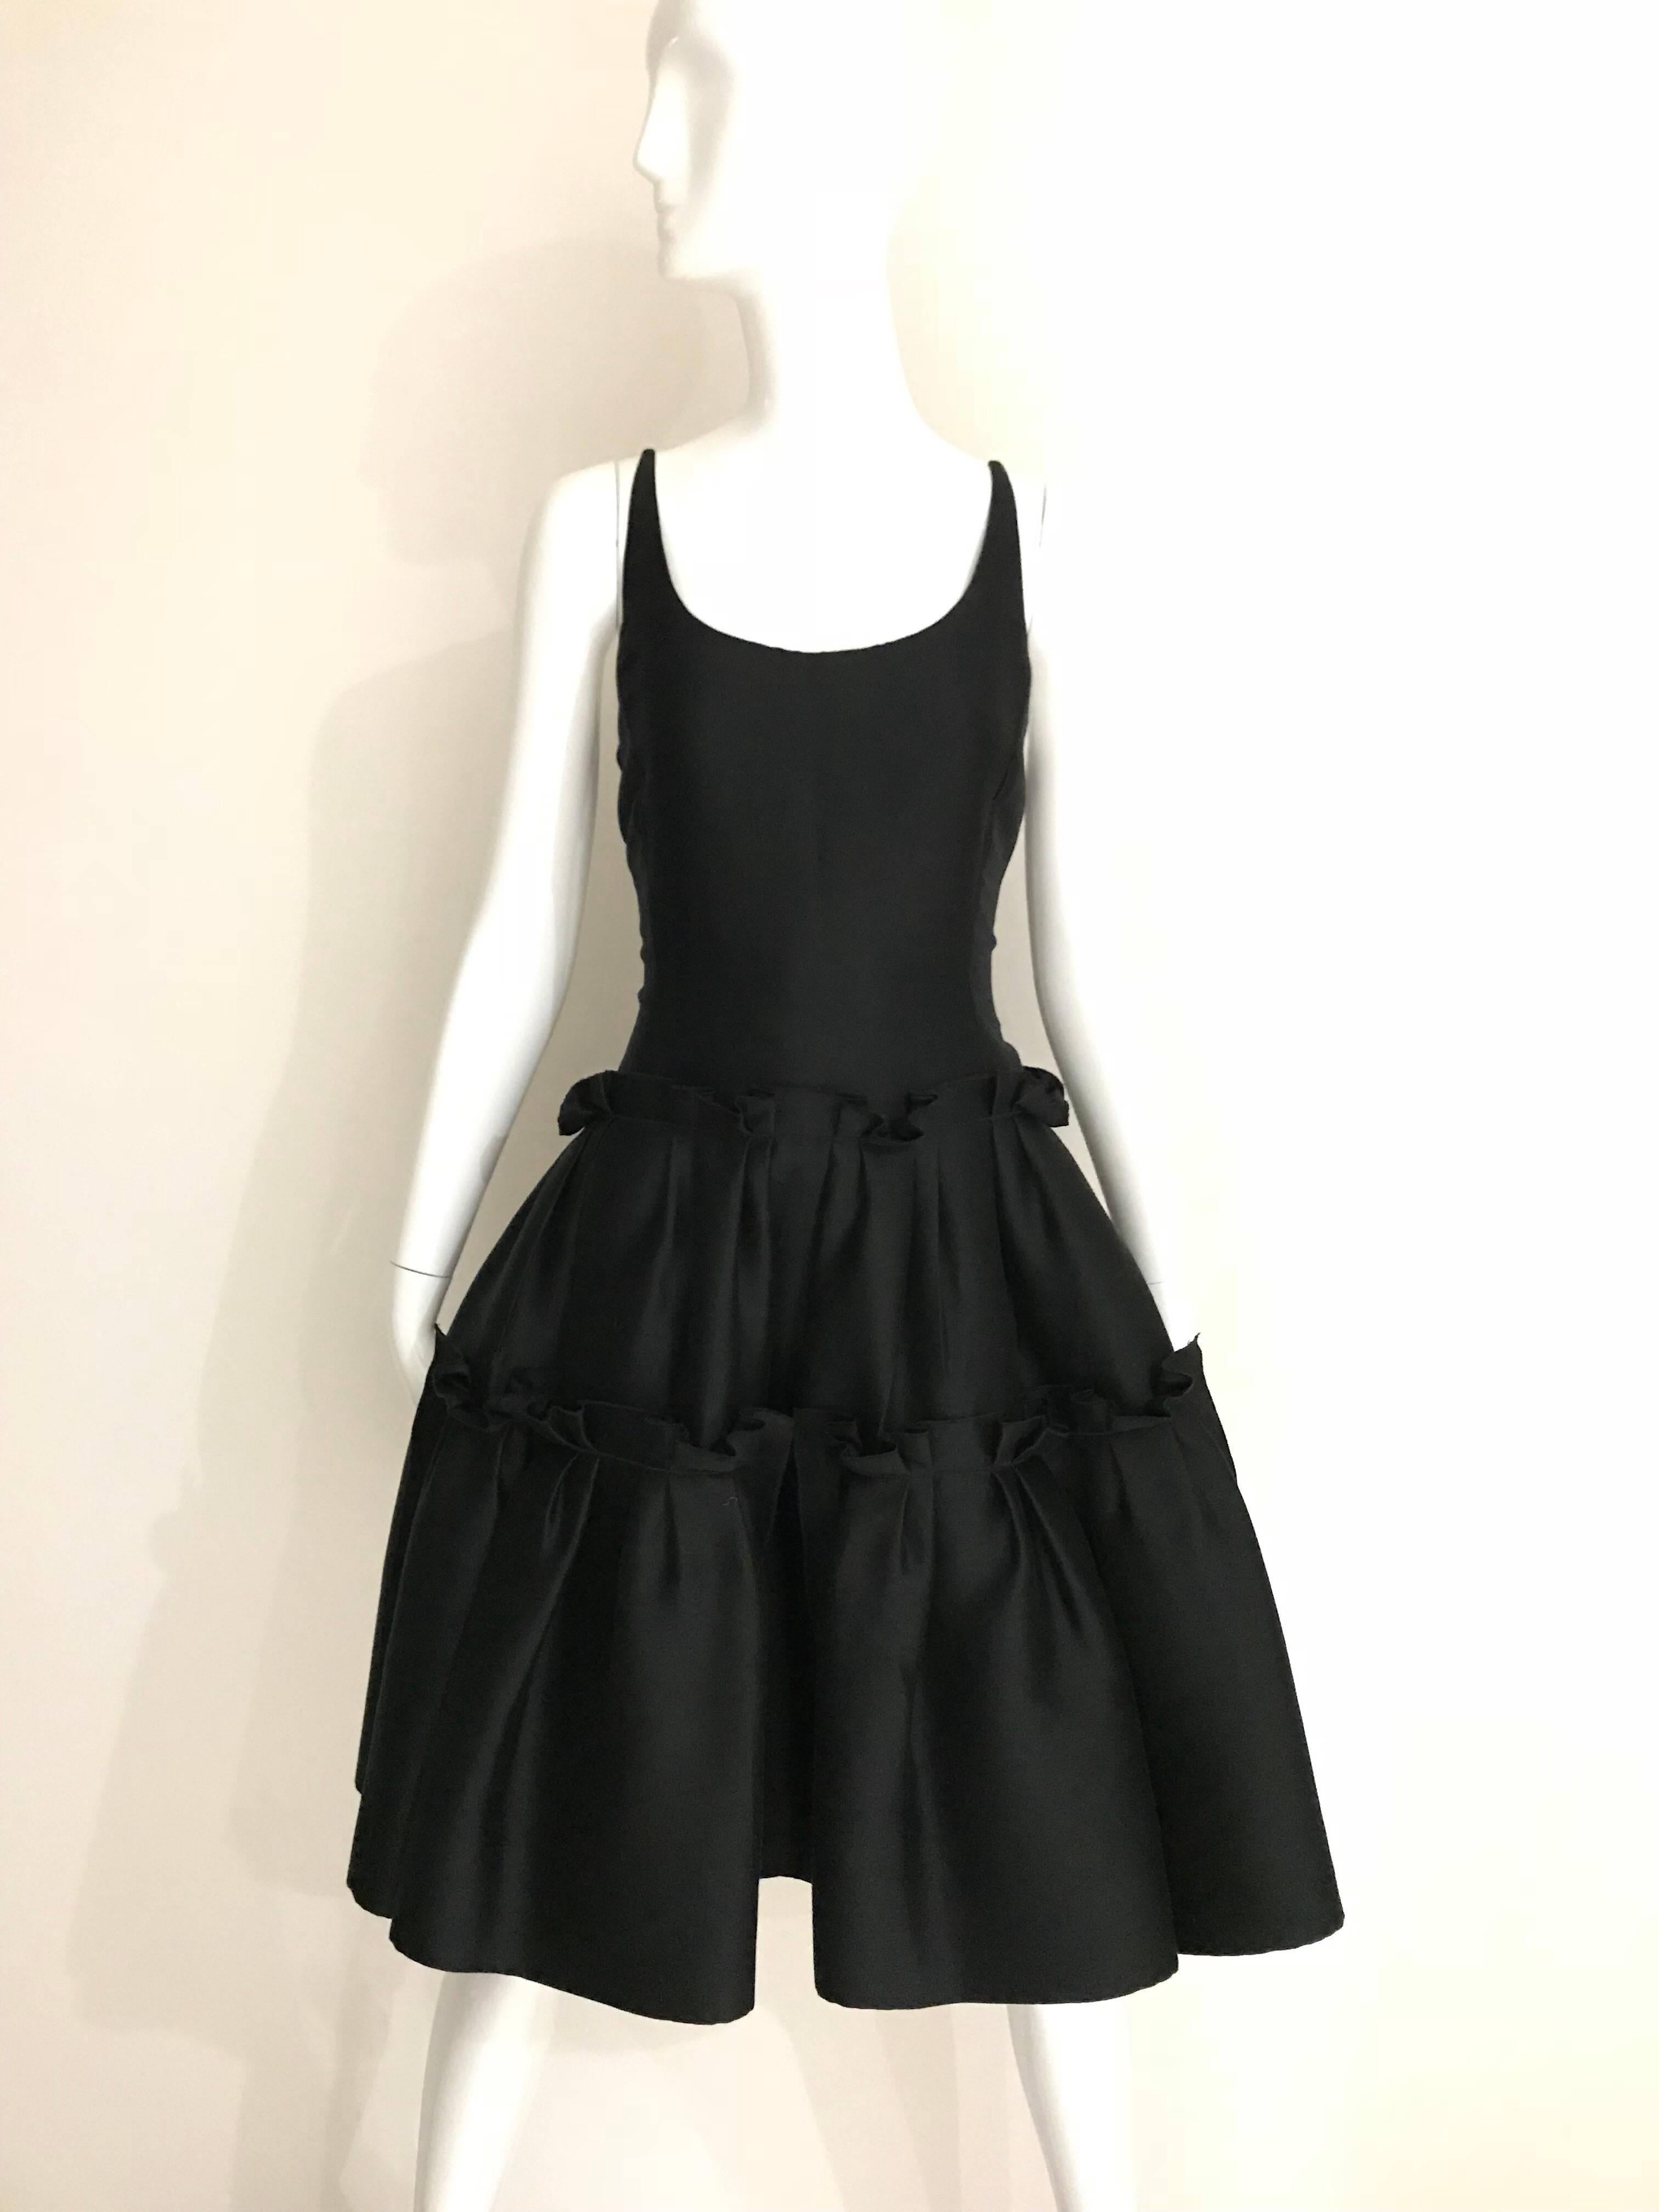 Elegant Oscar De La Renta Black Silk Shantung Cocktail Dress with thin spaghetti strap with tulle flair skirt . Dress zipped at the back. 
Size: 4 / Small 
**** This Garment has been professionally Dry Cleaned and Ready to wear.

